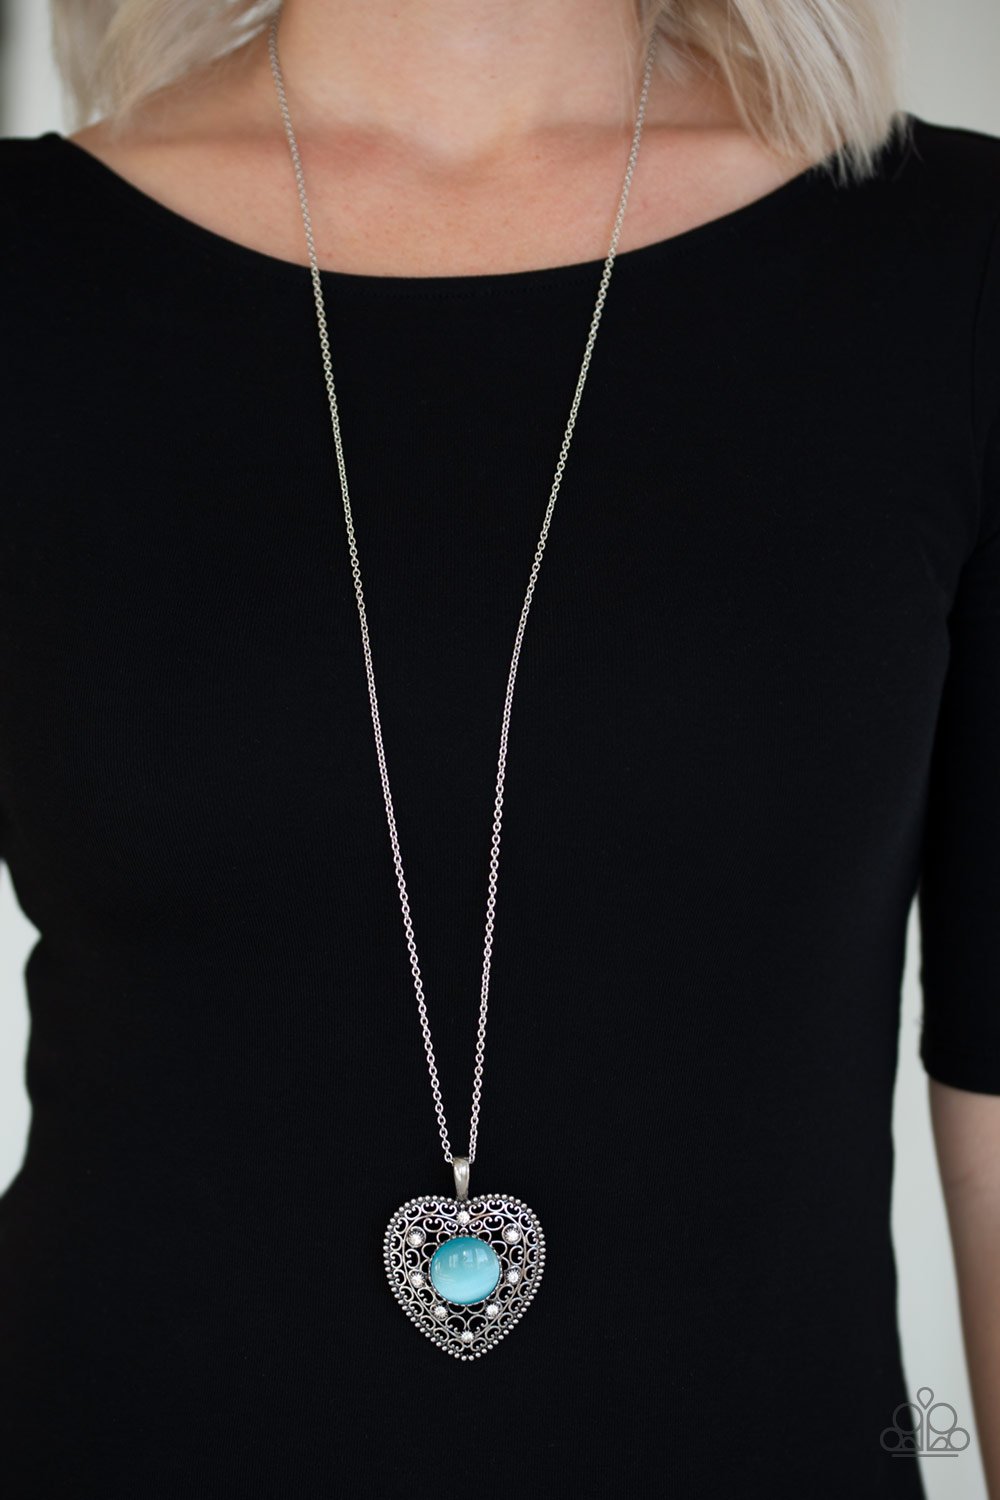 One Heart-blue-Paparazzi necklace